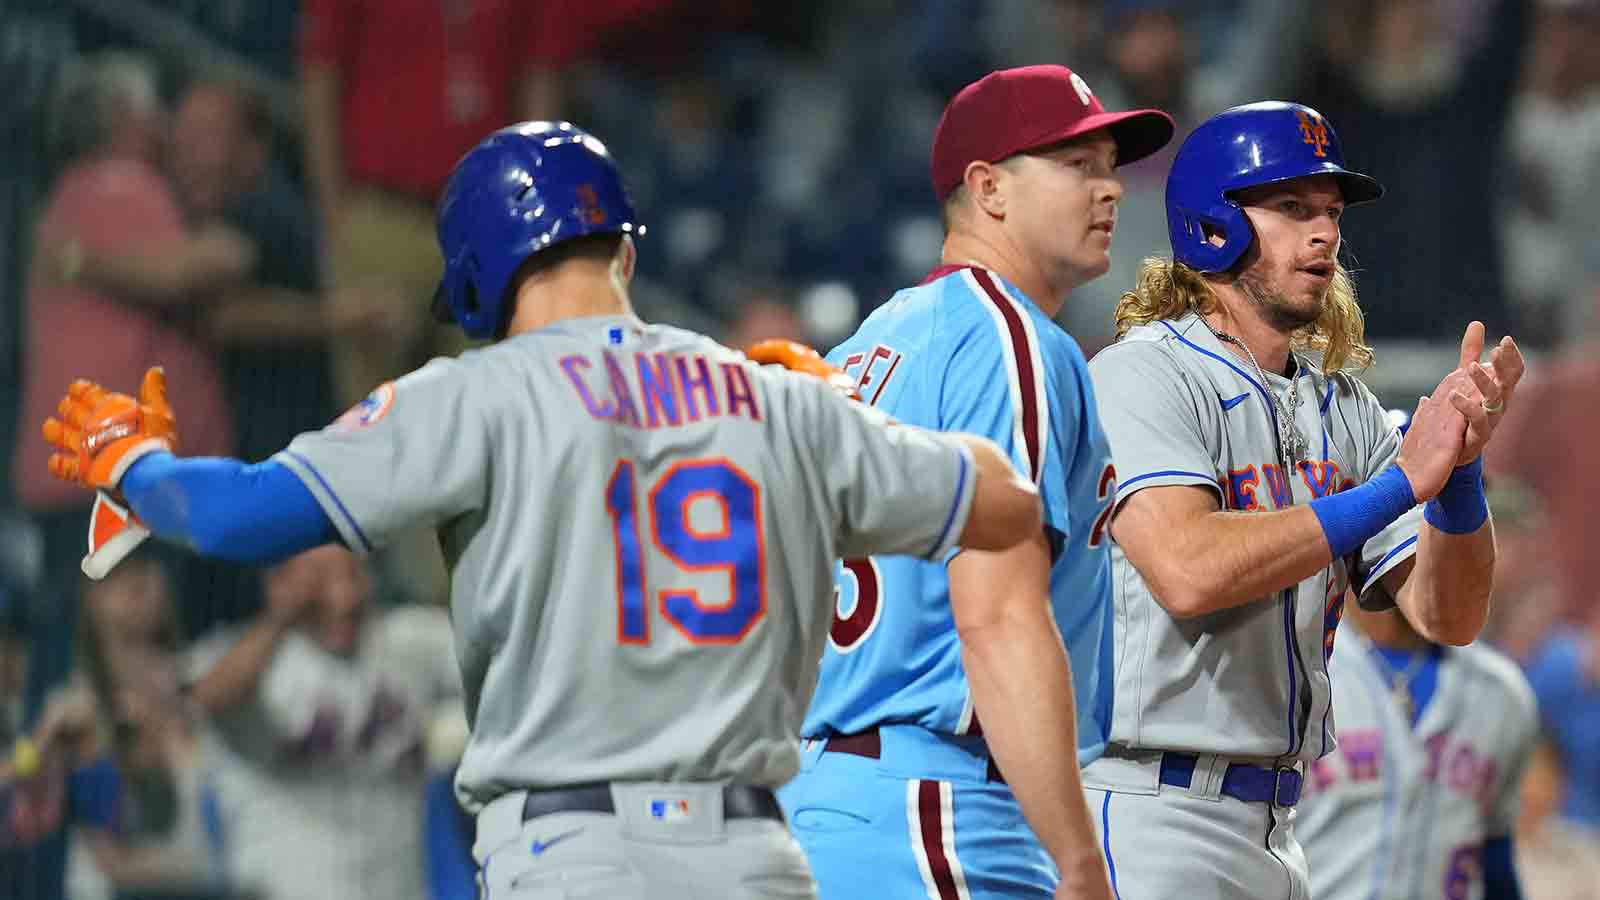 ESPN Stats & Info on X: The Mets are 80-0 this season when leading after  the 8th inning. Their 80 straight wins when leading after the 8th inning is  the longest streak